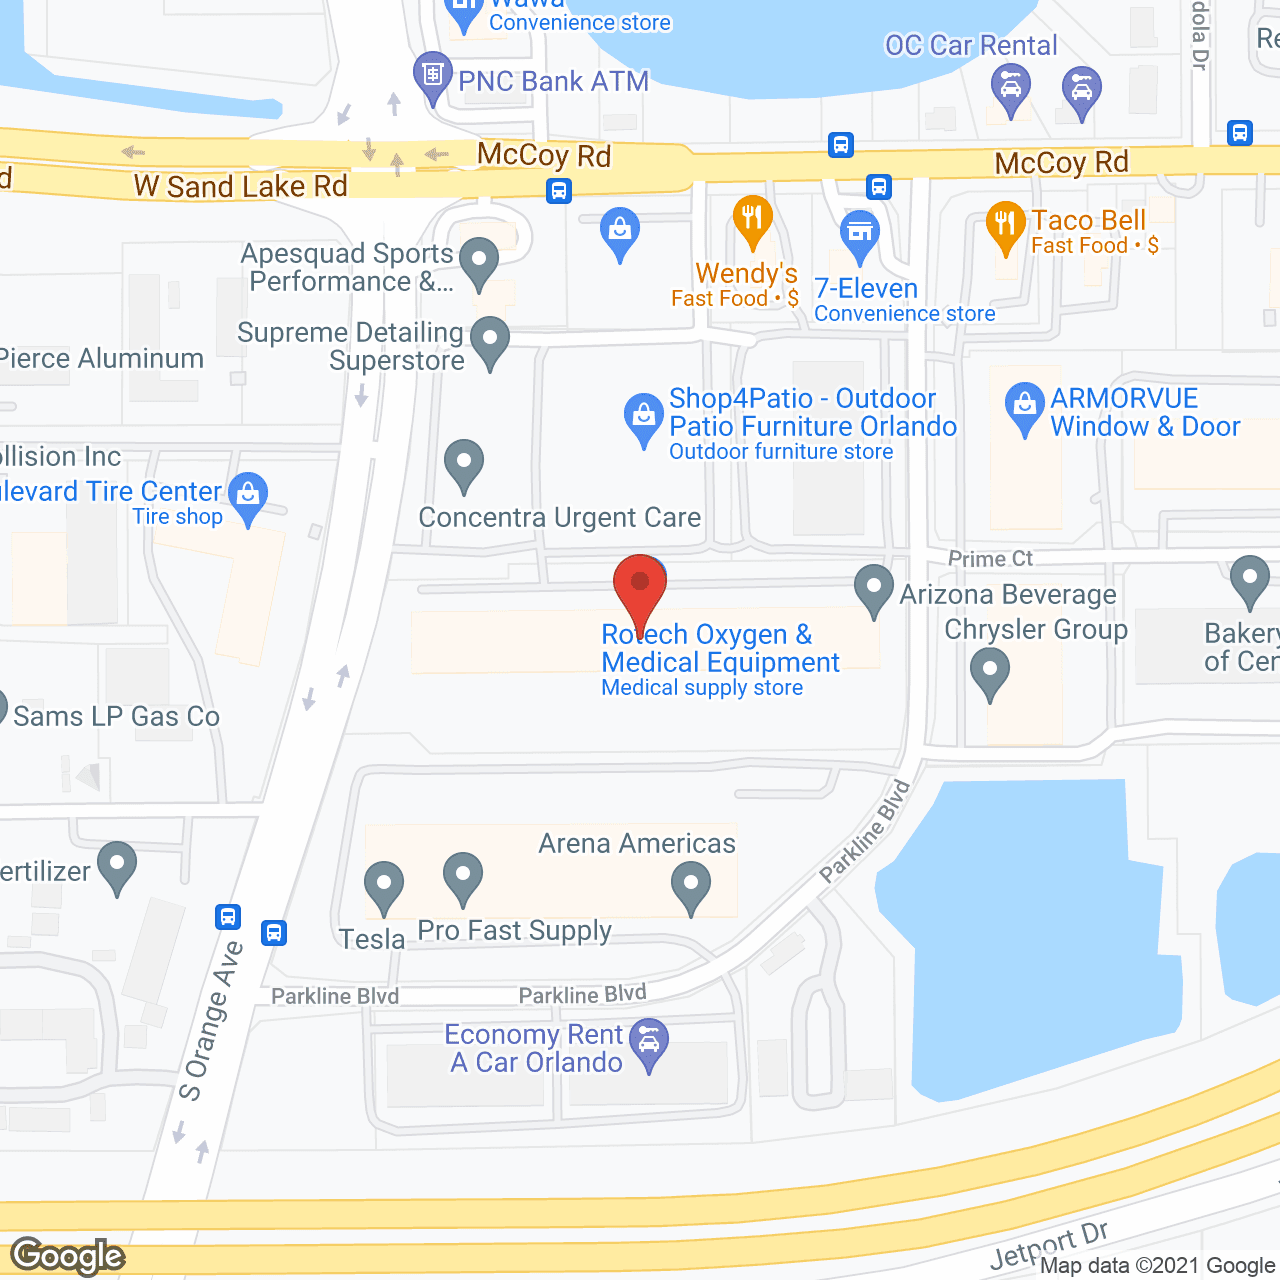 Rotech Oxygen & Medical Equip in google map